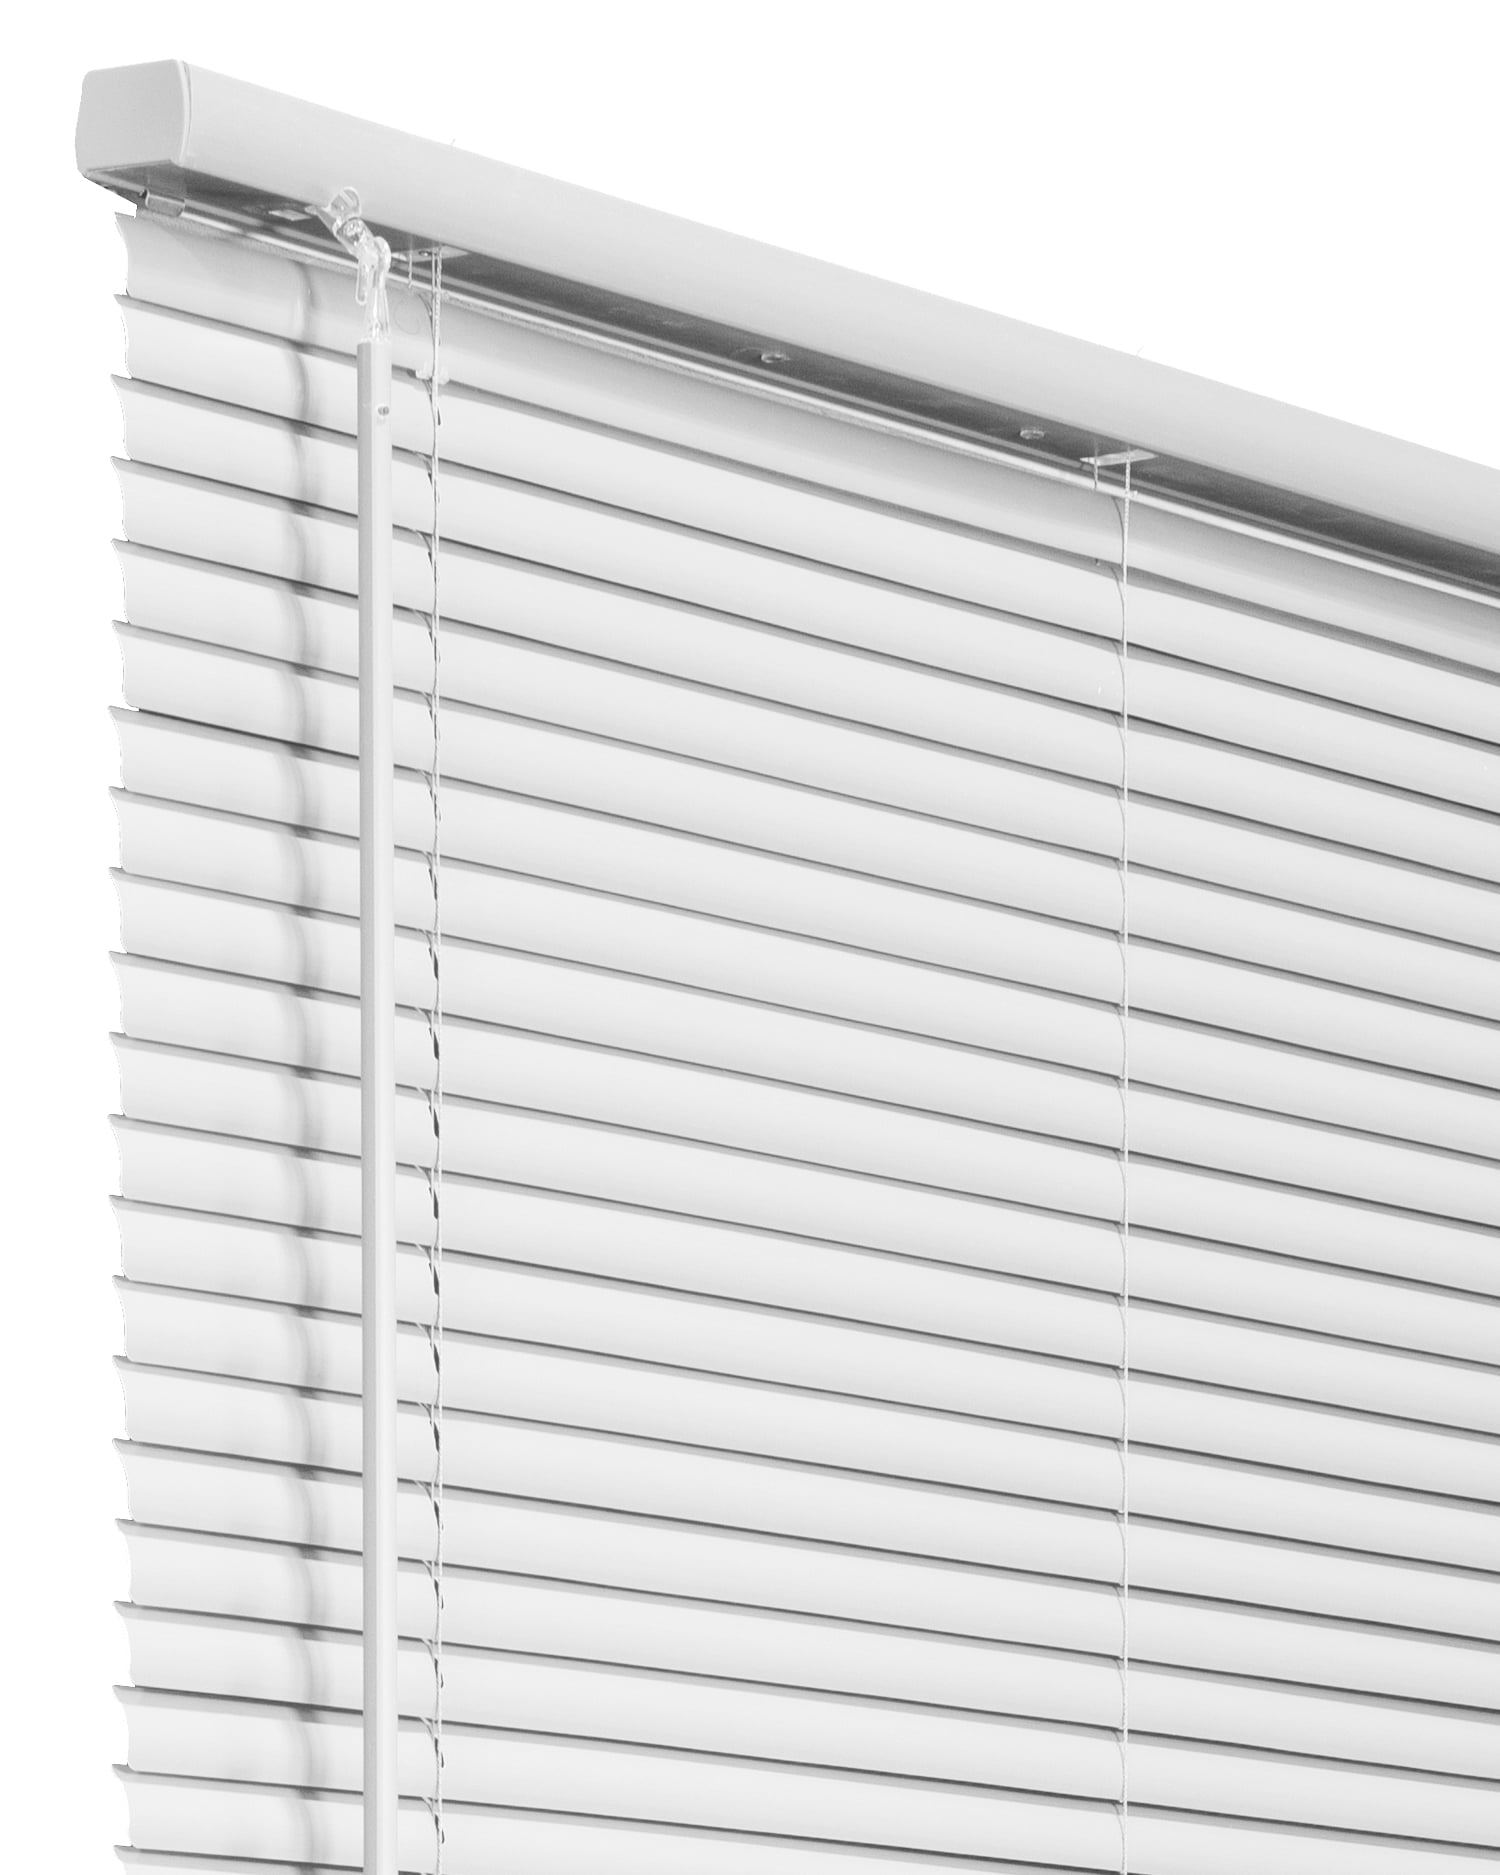 VERTICAL BLIND FABRIC DAWN MINI FOR SLATS BLADES KIDS ROOM WITH BOTTOM WEIGHTS